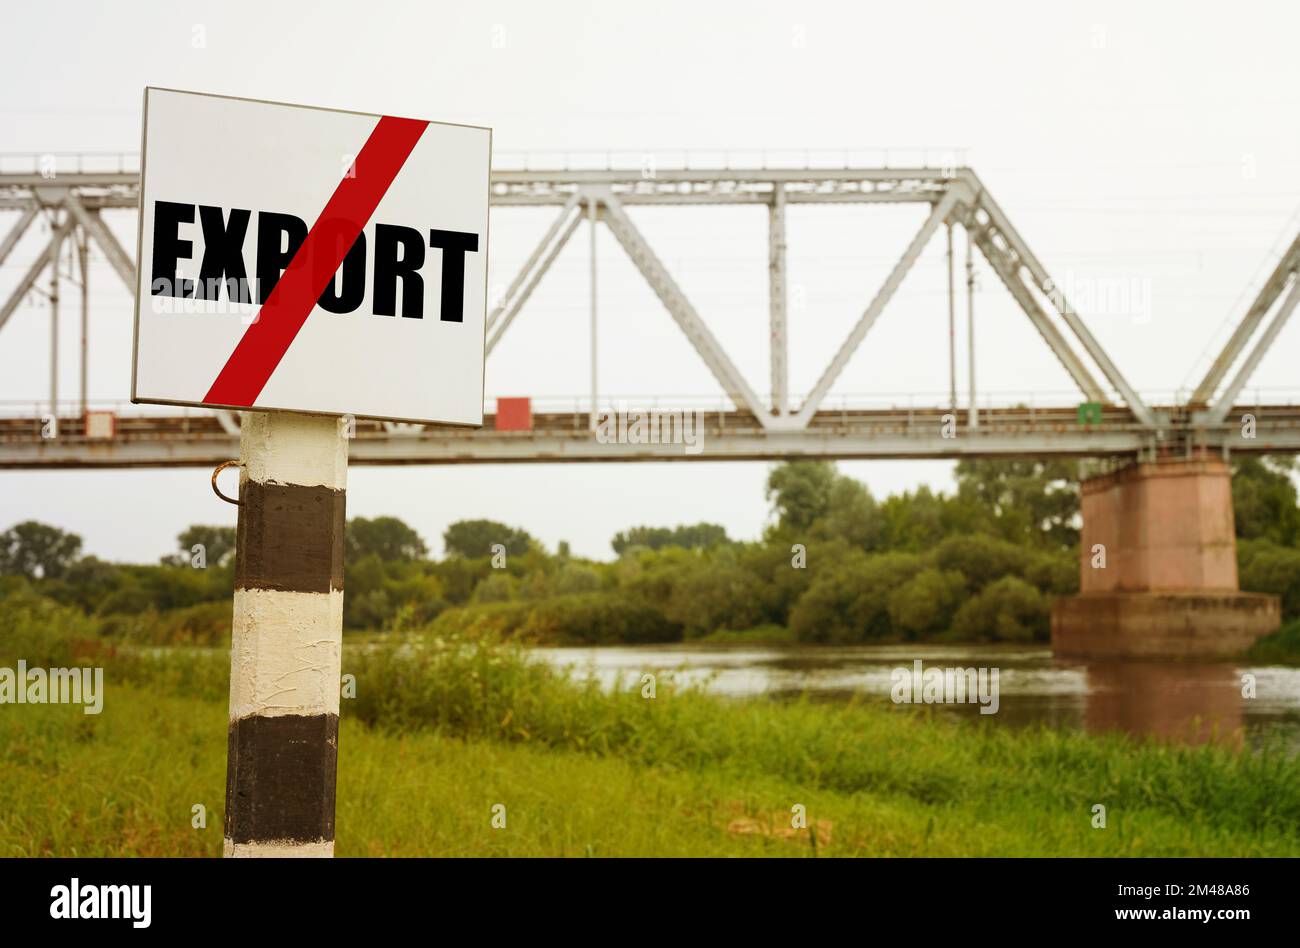 On the background of the railway bridge there is a sign with the inscription - NO EXPORT. Stock Photo